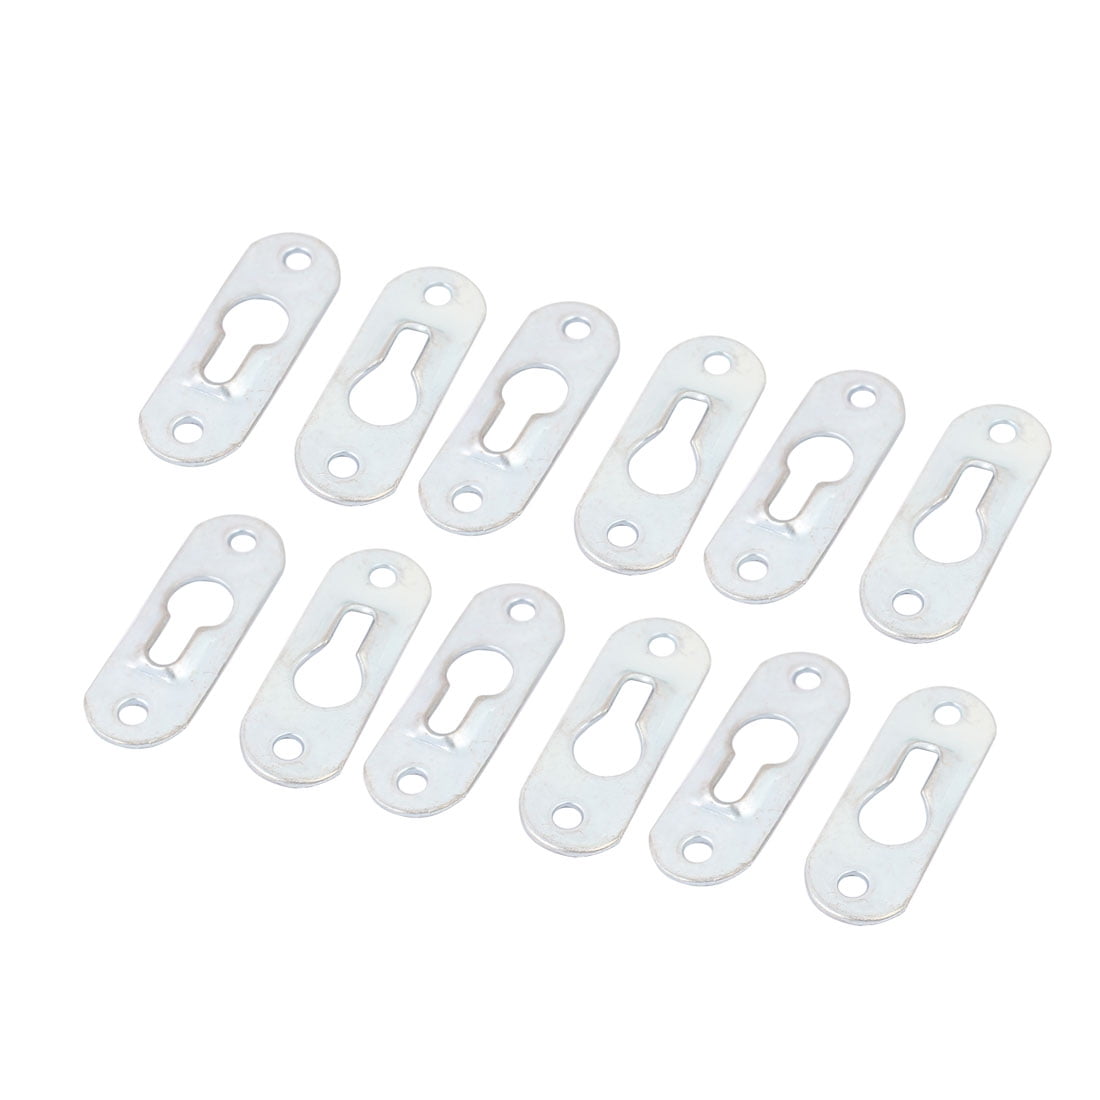 10 x crafts Picture Mirror Glass Fixing Hooks plates Frame Hanging Hanger 